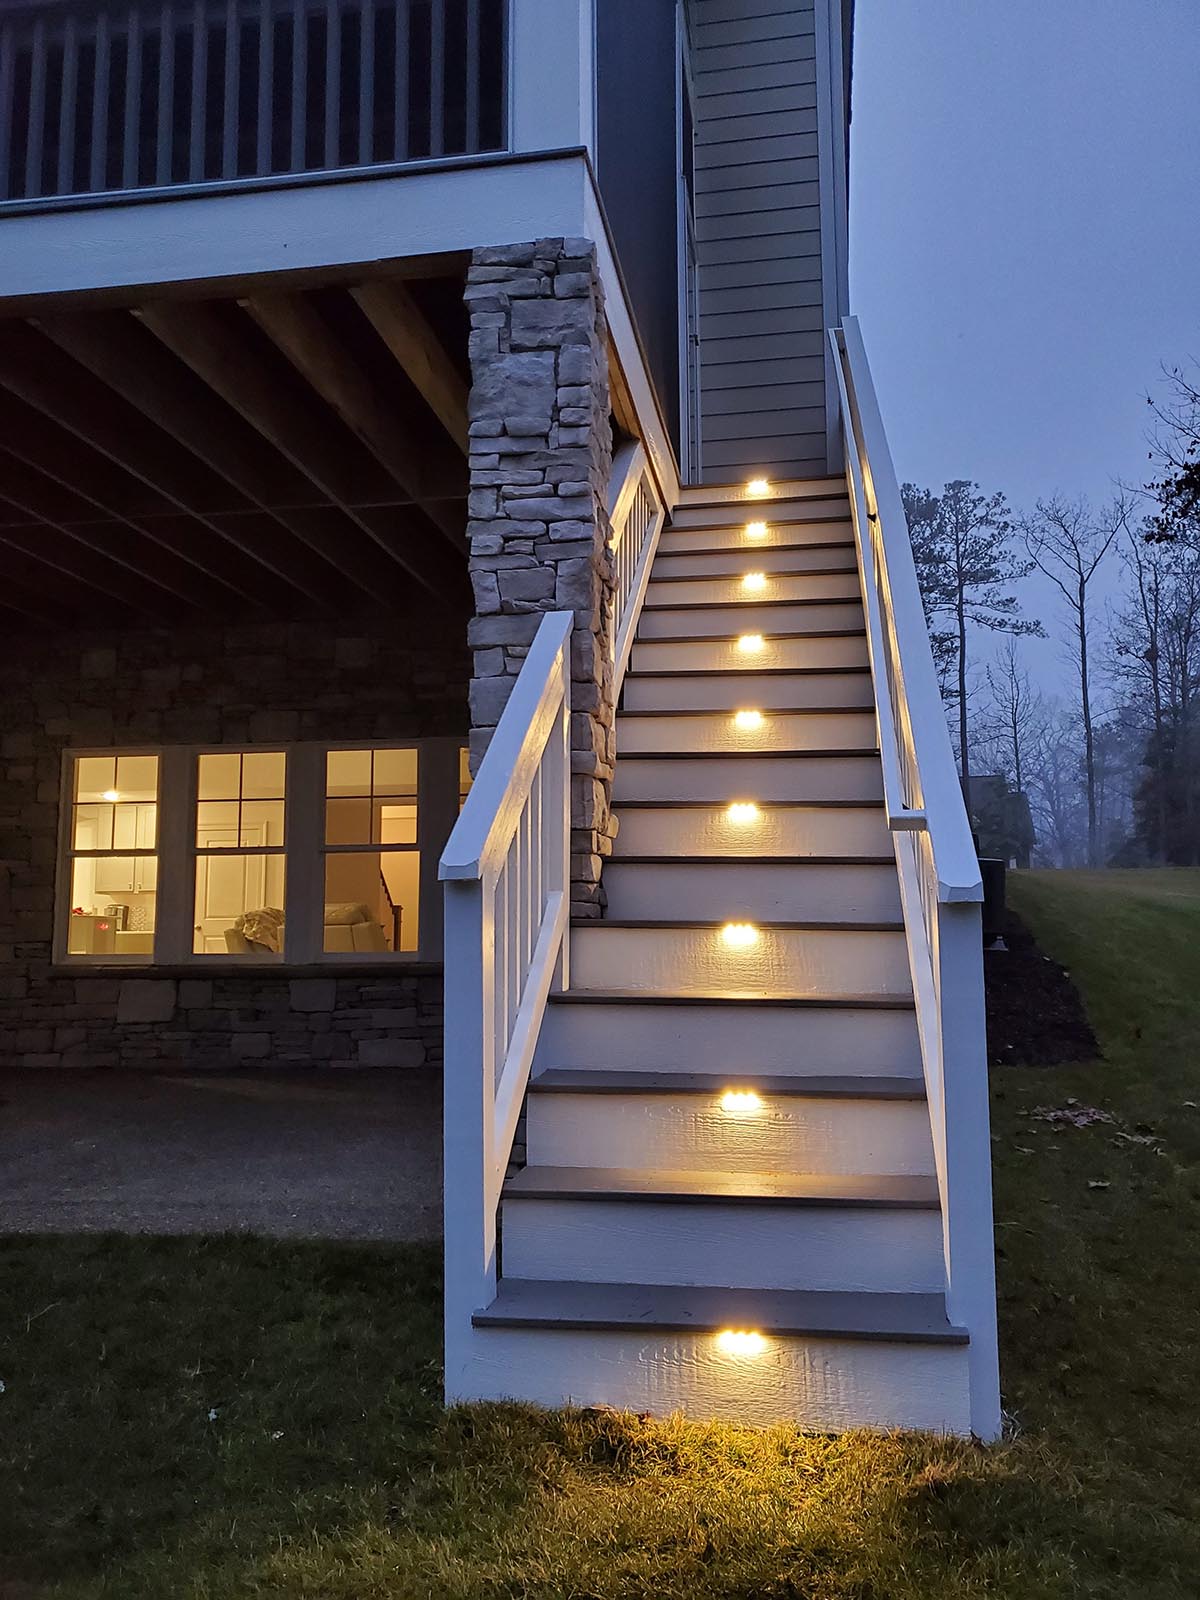 residential backyard staircase with illumination lighting on the stairs 